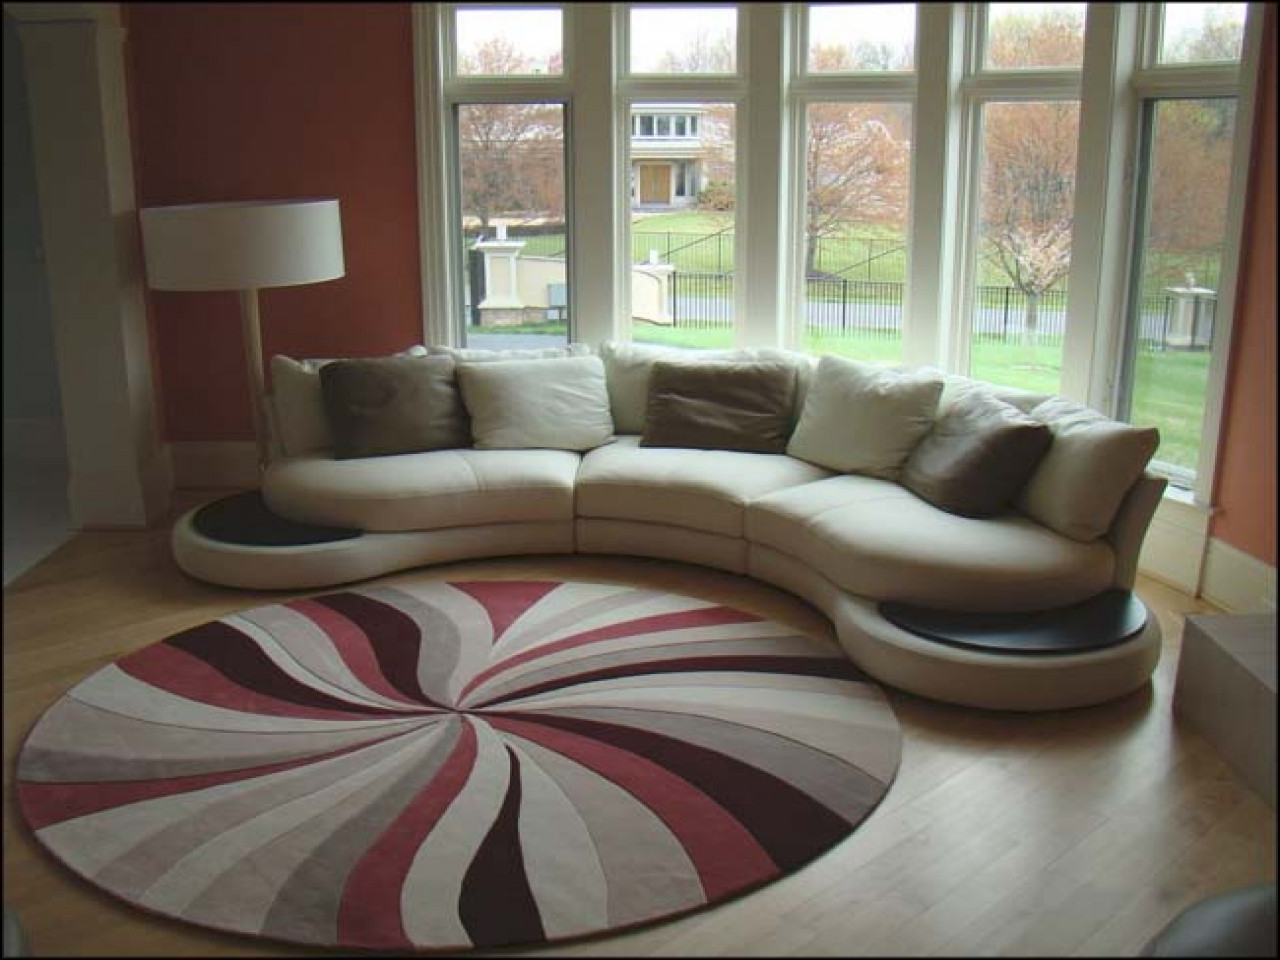 Rug For Living Room
 Rugs for Cozy Living Room Area Rugs Ideas